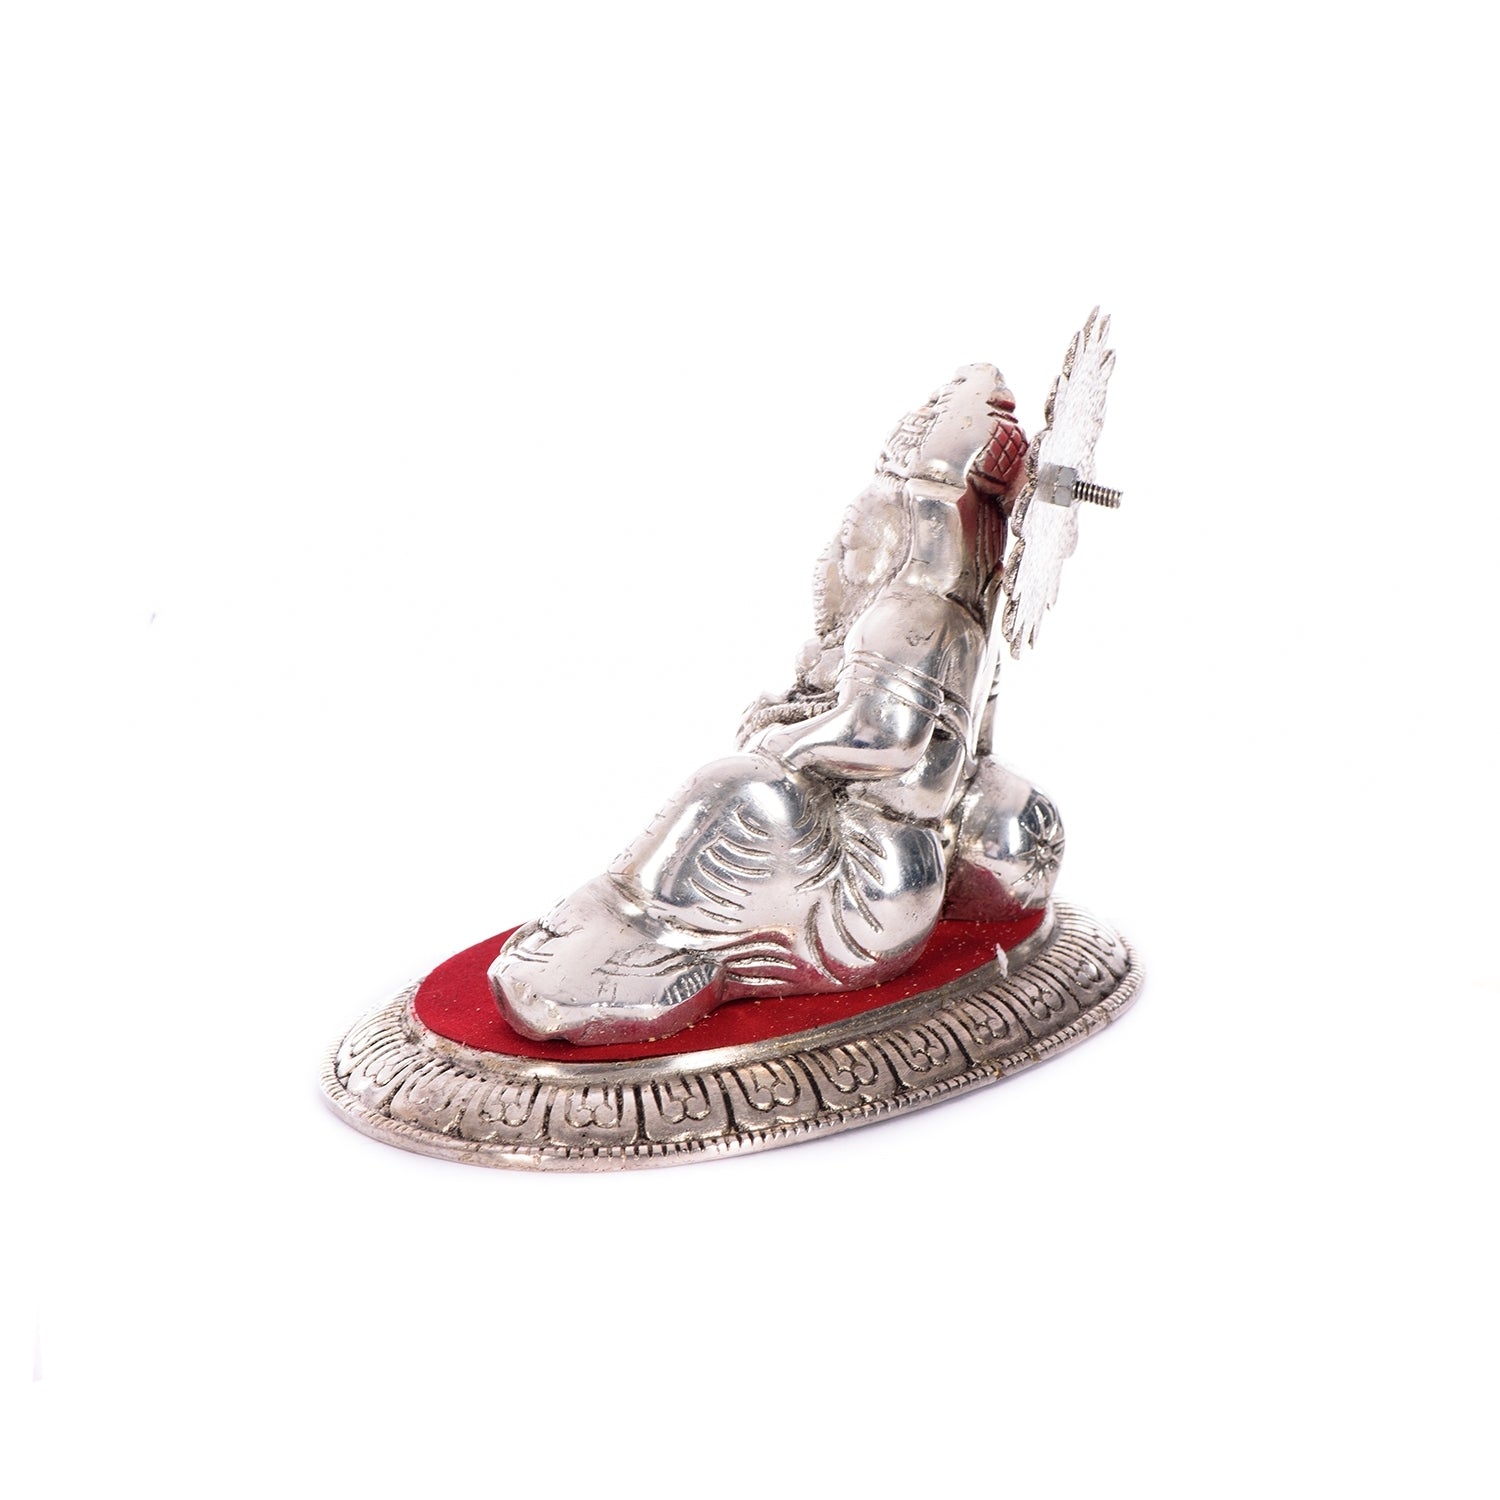 White Metal Silver and Red Lord Ganesha Idol 5